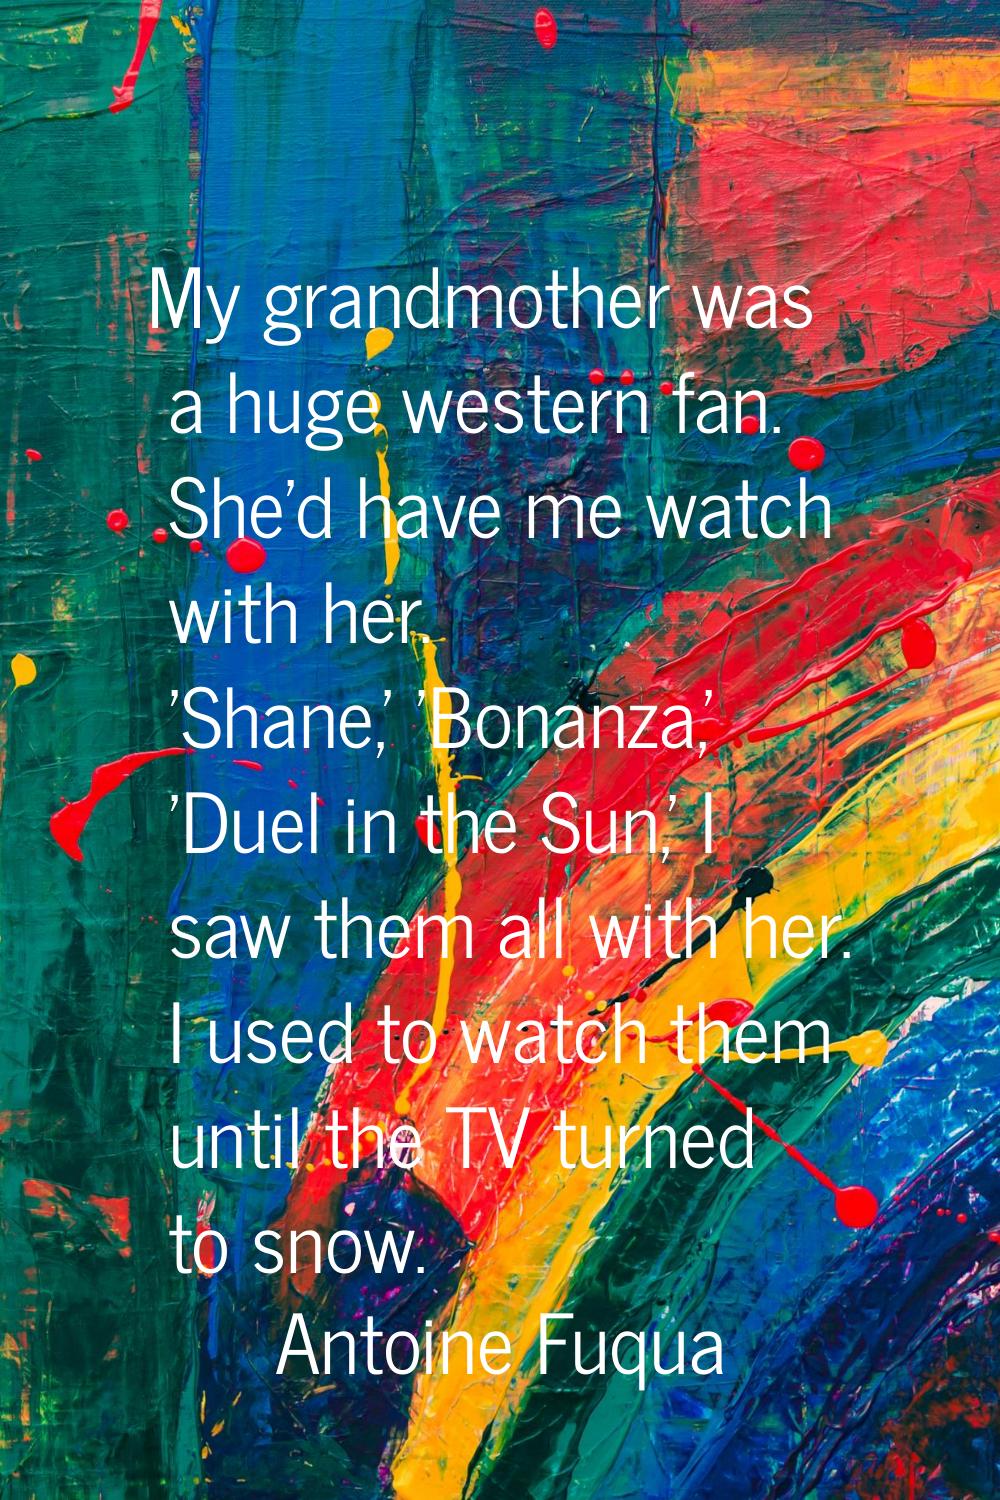 My grandmother was a huge western fan. She'd have me watch with her. 'Shane,' 'Bonanza,' 'Duel in t